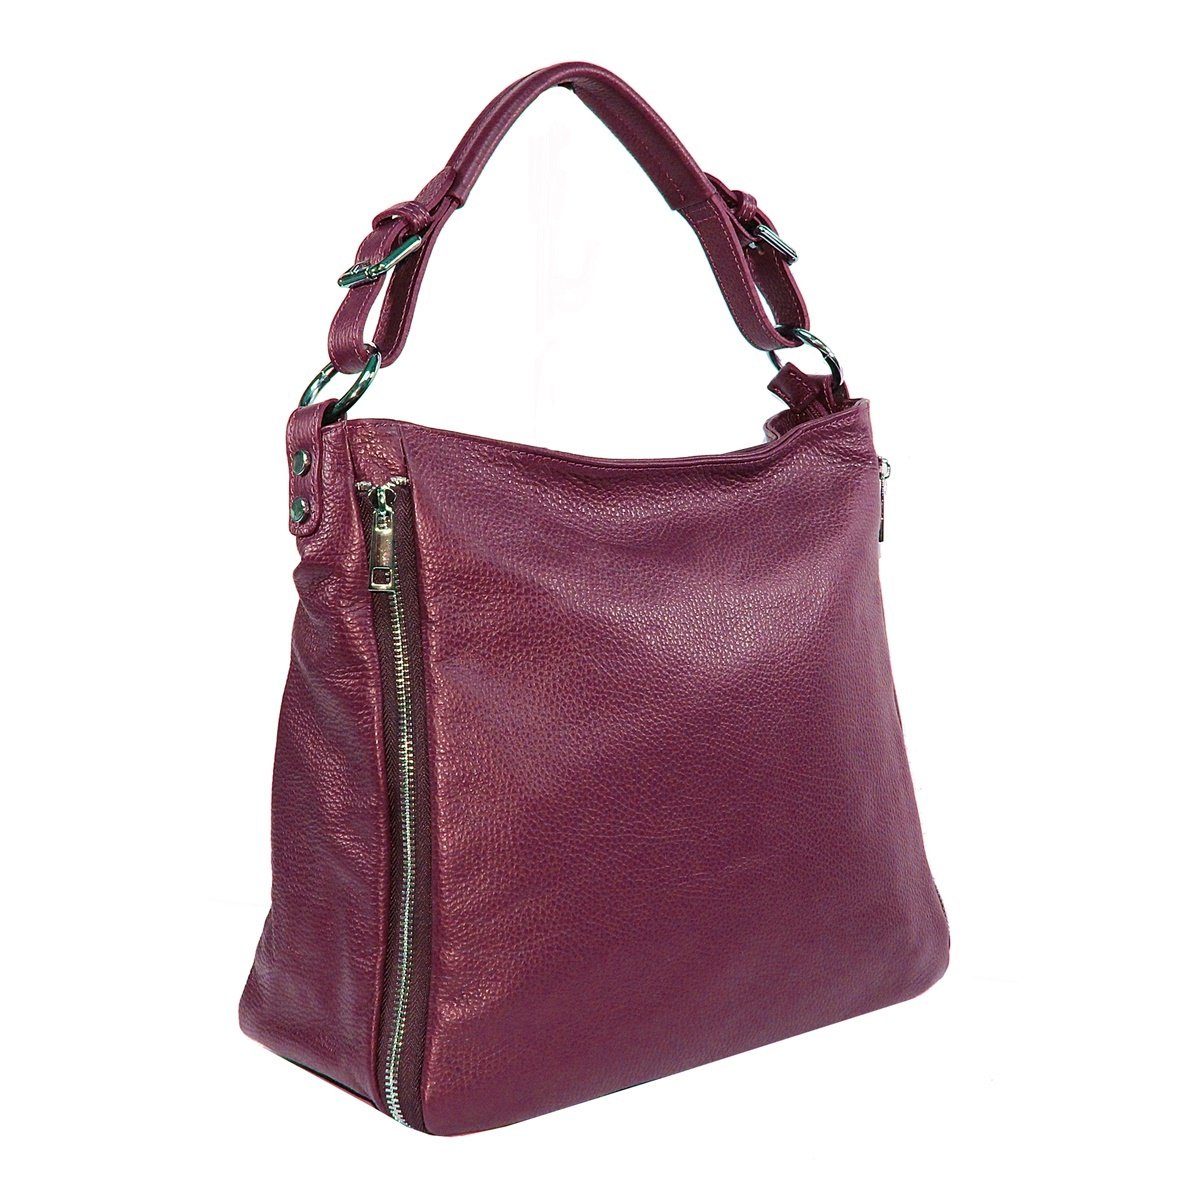 Handtasche in fs7142, Italy Weinrot Made fs-bags